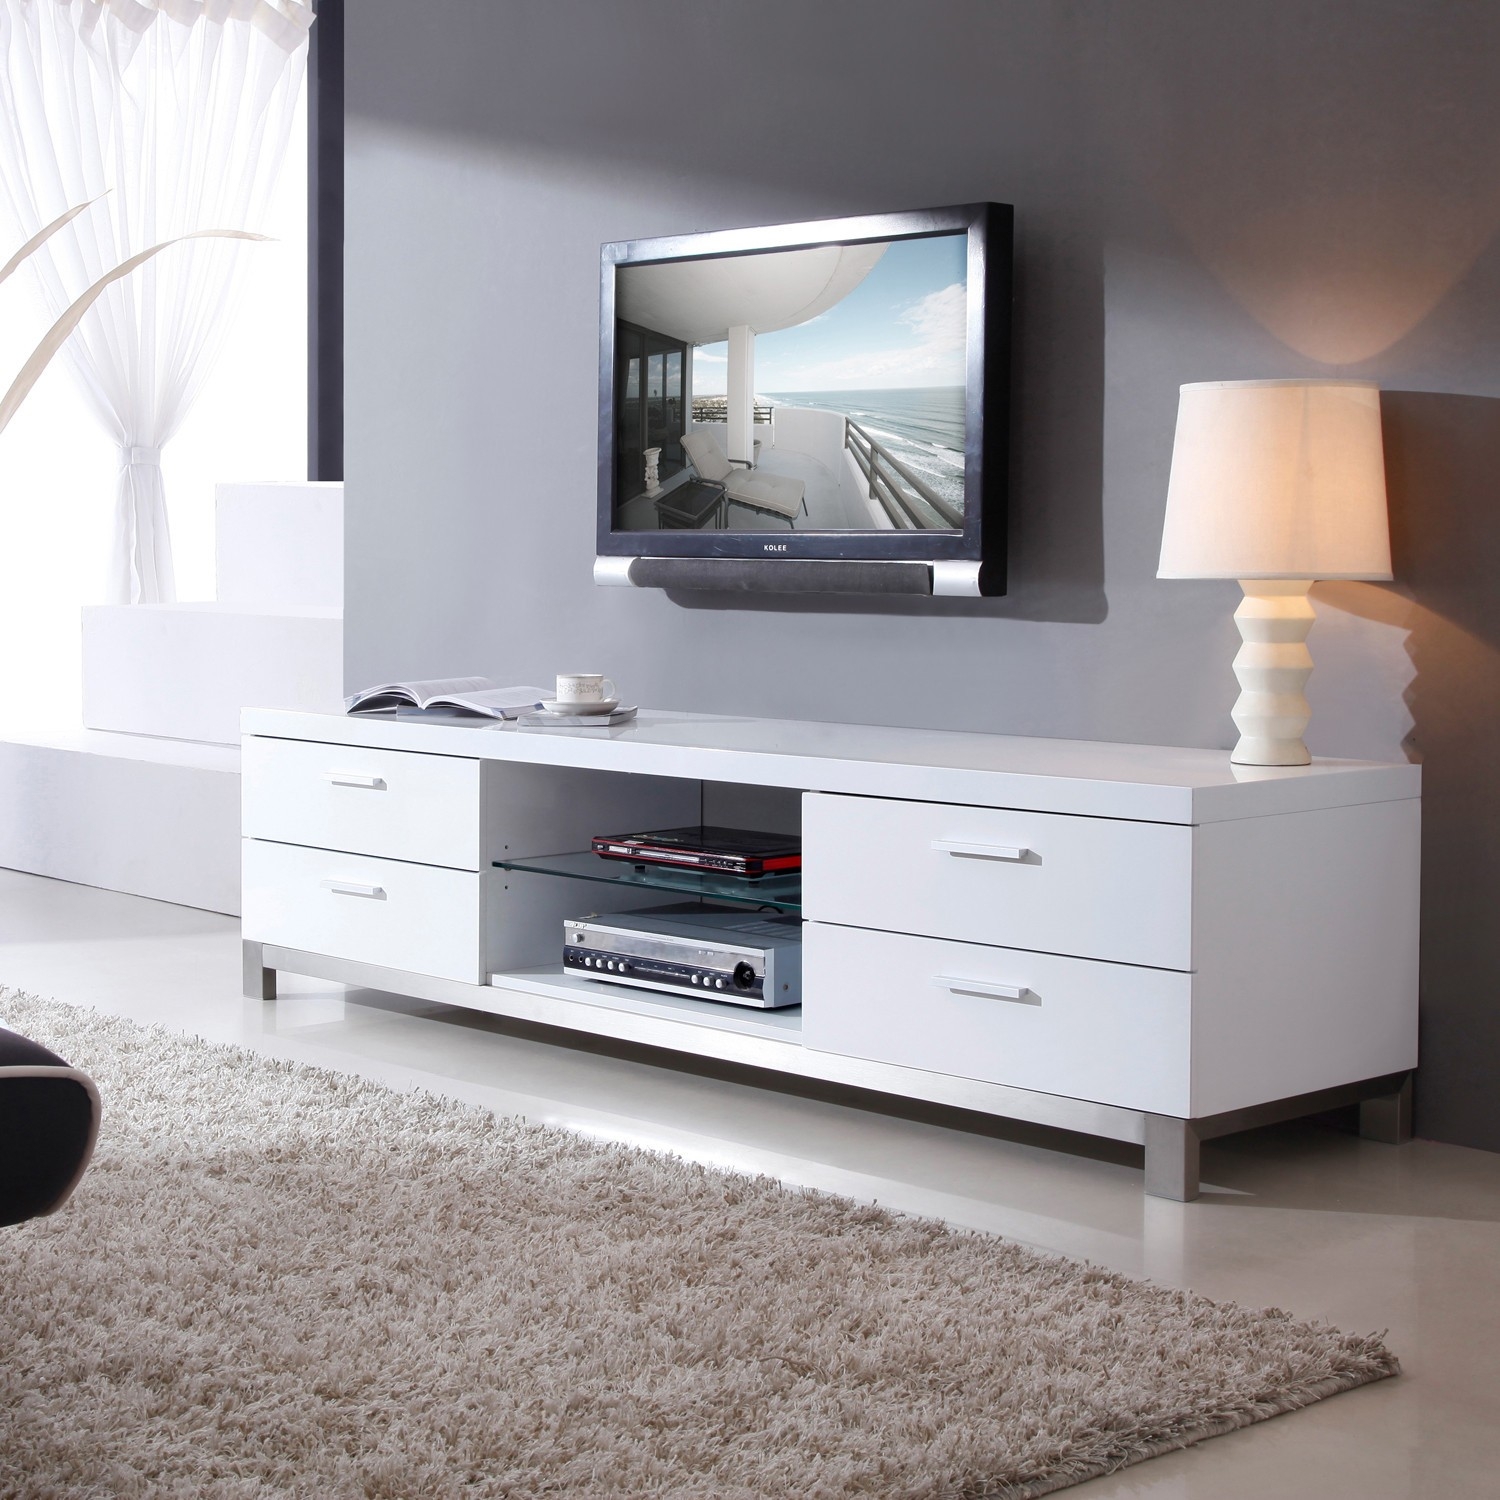 Contemporary White Tv Stand Ideas on Foter